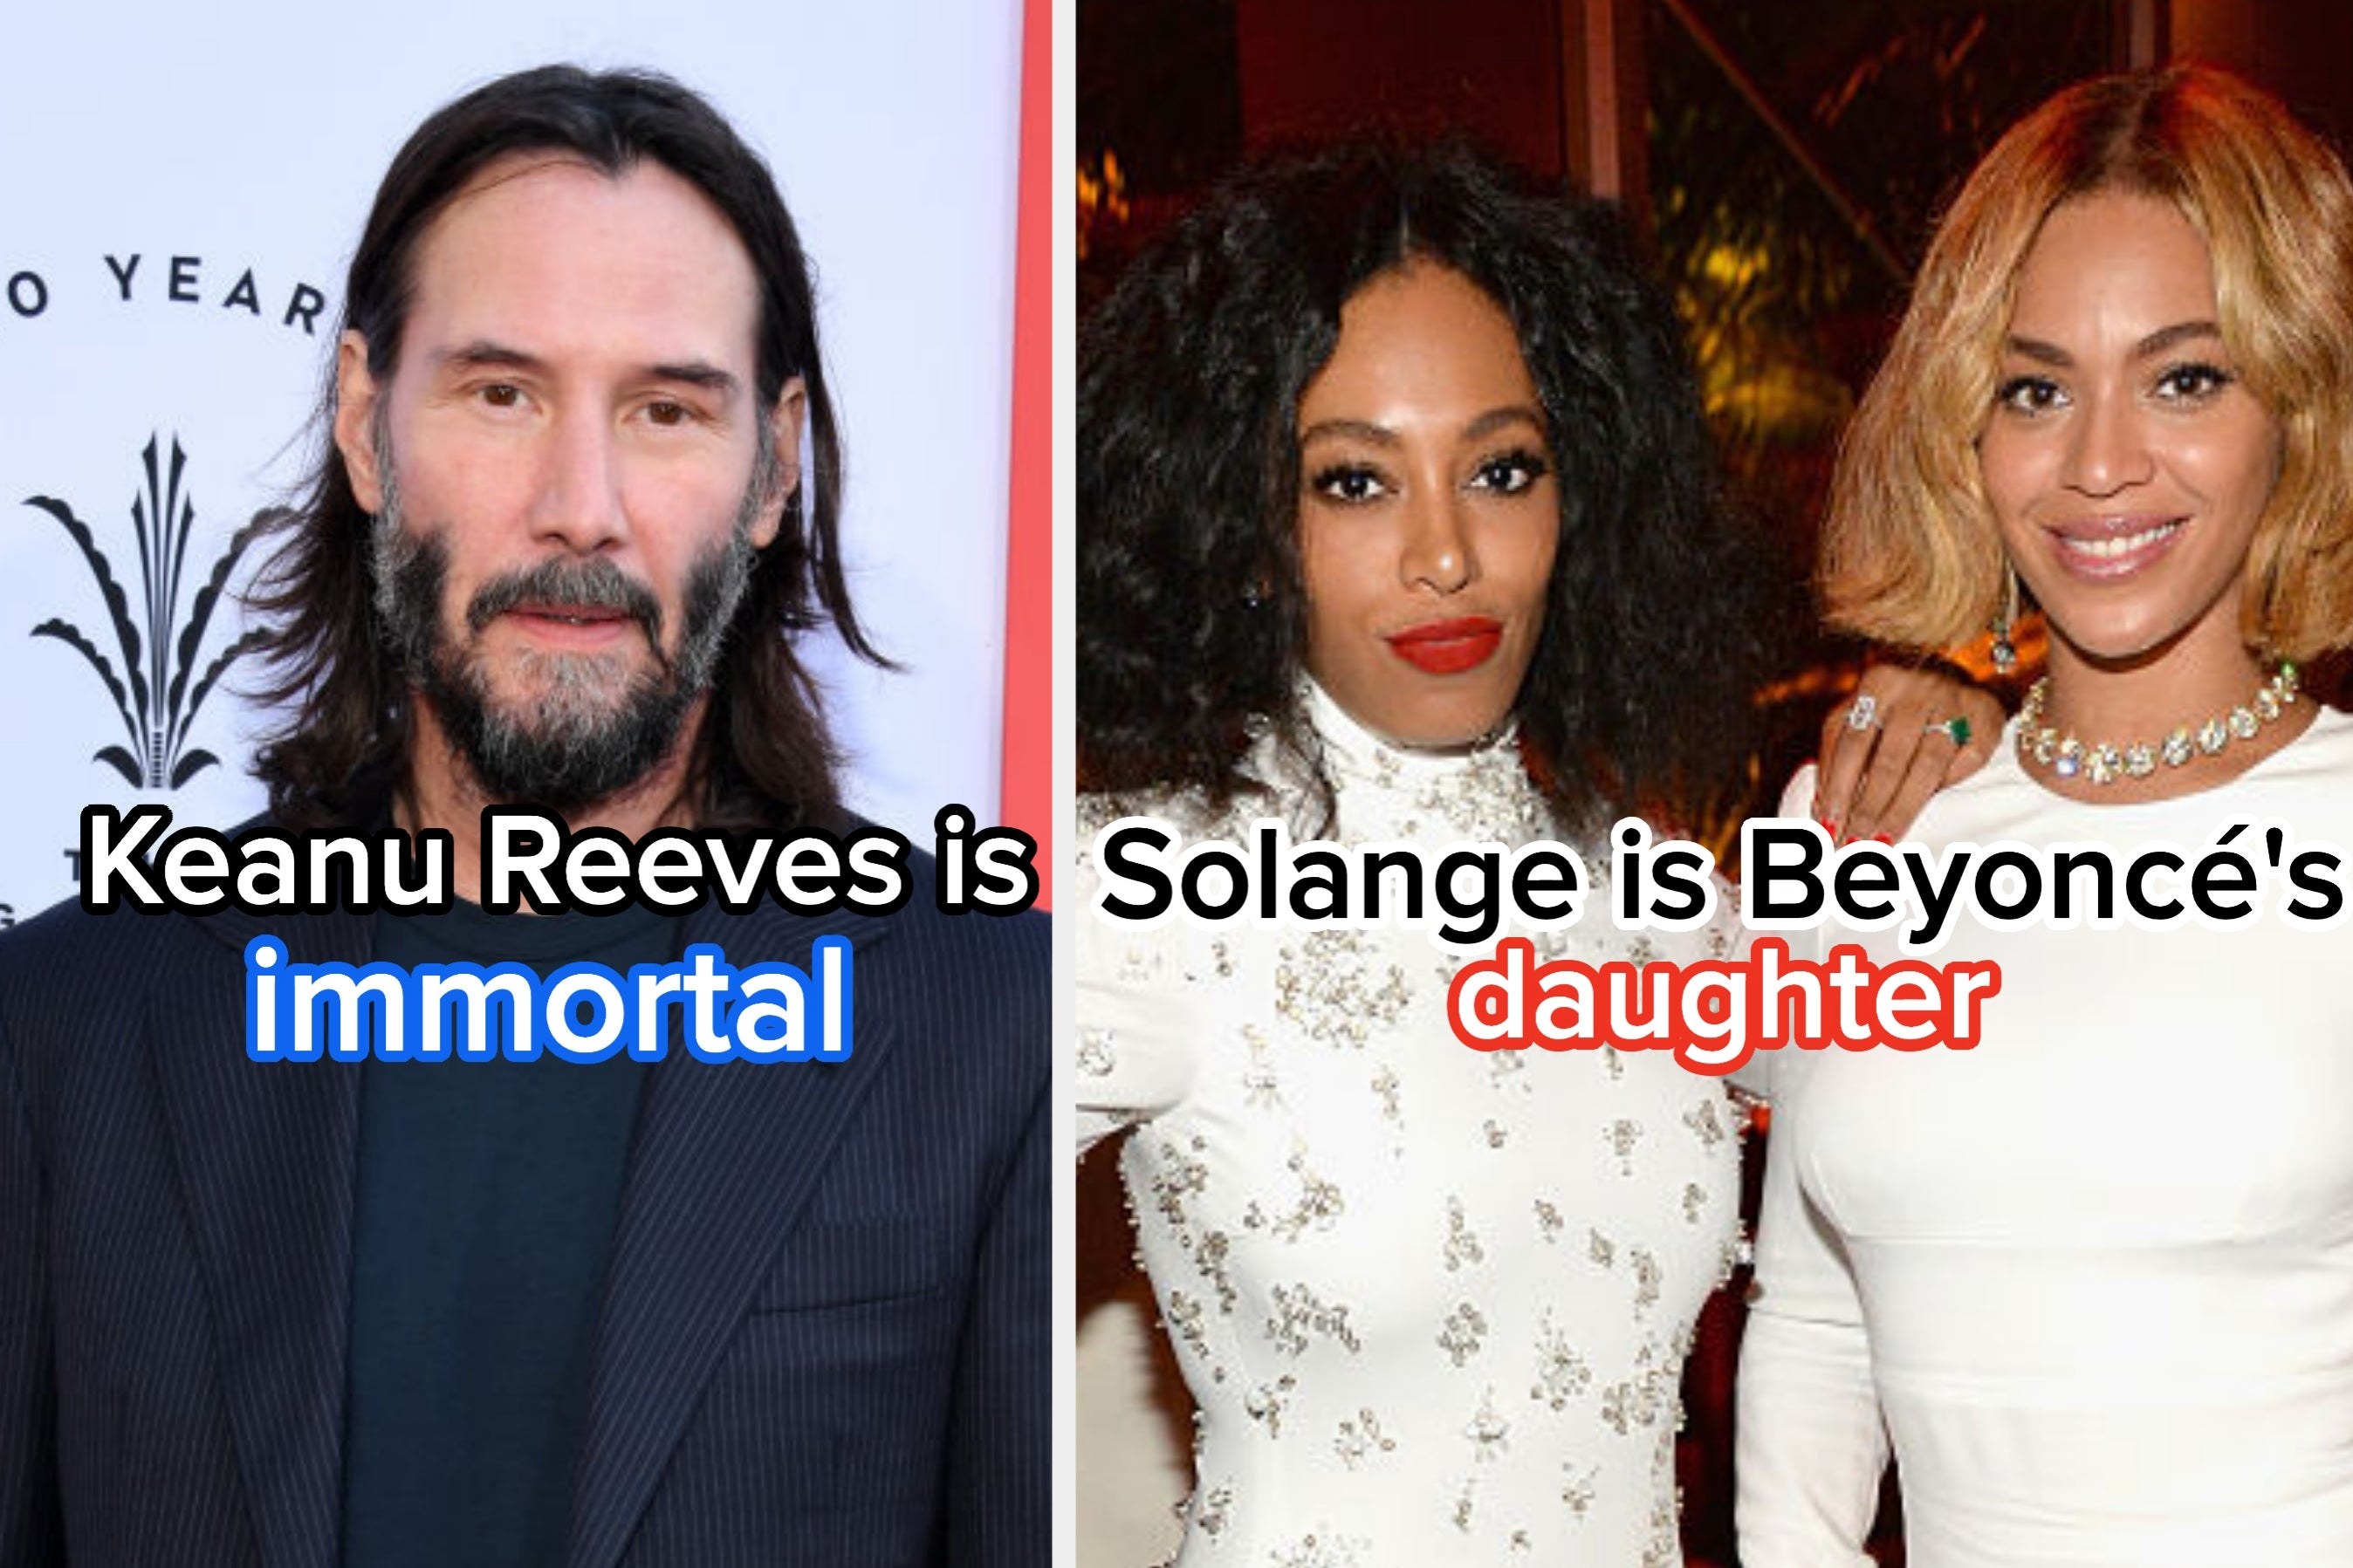 Two images: on the left, an image of Keanu Reeves with the text, &quot;Keanu Reeves is immortal&quot; overlayed on top. On the right, an image of Solange and Beyoncé with the text &quot;Solange is Beyoncé&#x27;s daughter&quot; overlayed on top